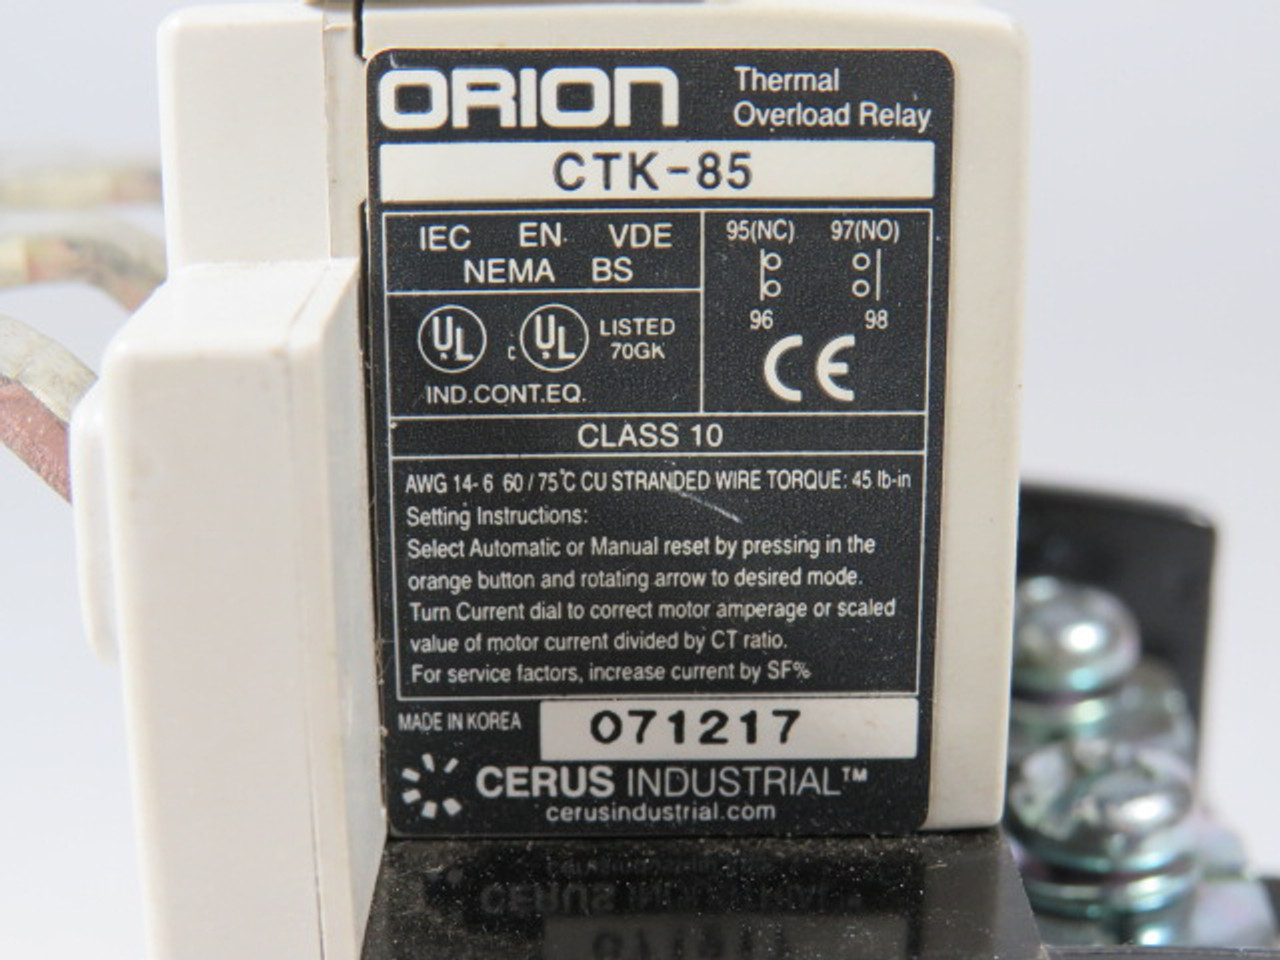 Cerus Orion CTK-85/3-22A Thermal Overload Relay 16-22A Range USED